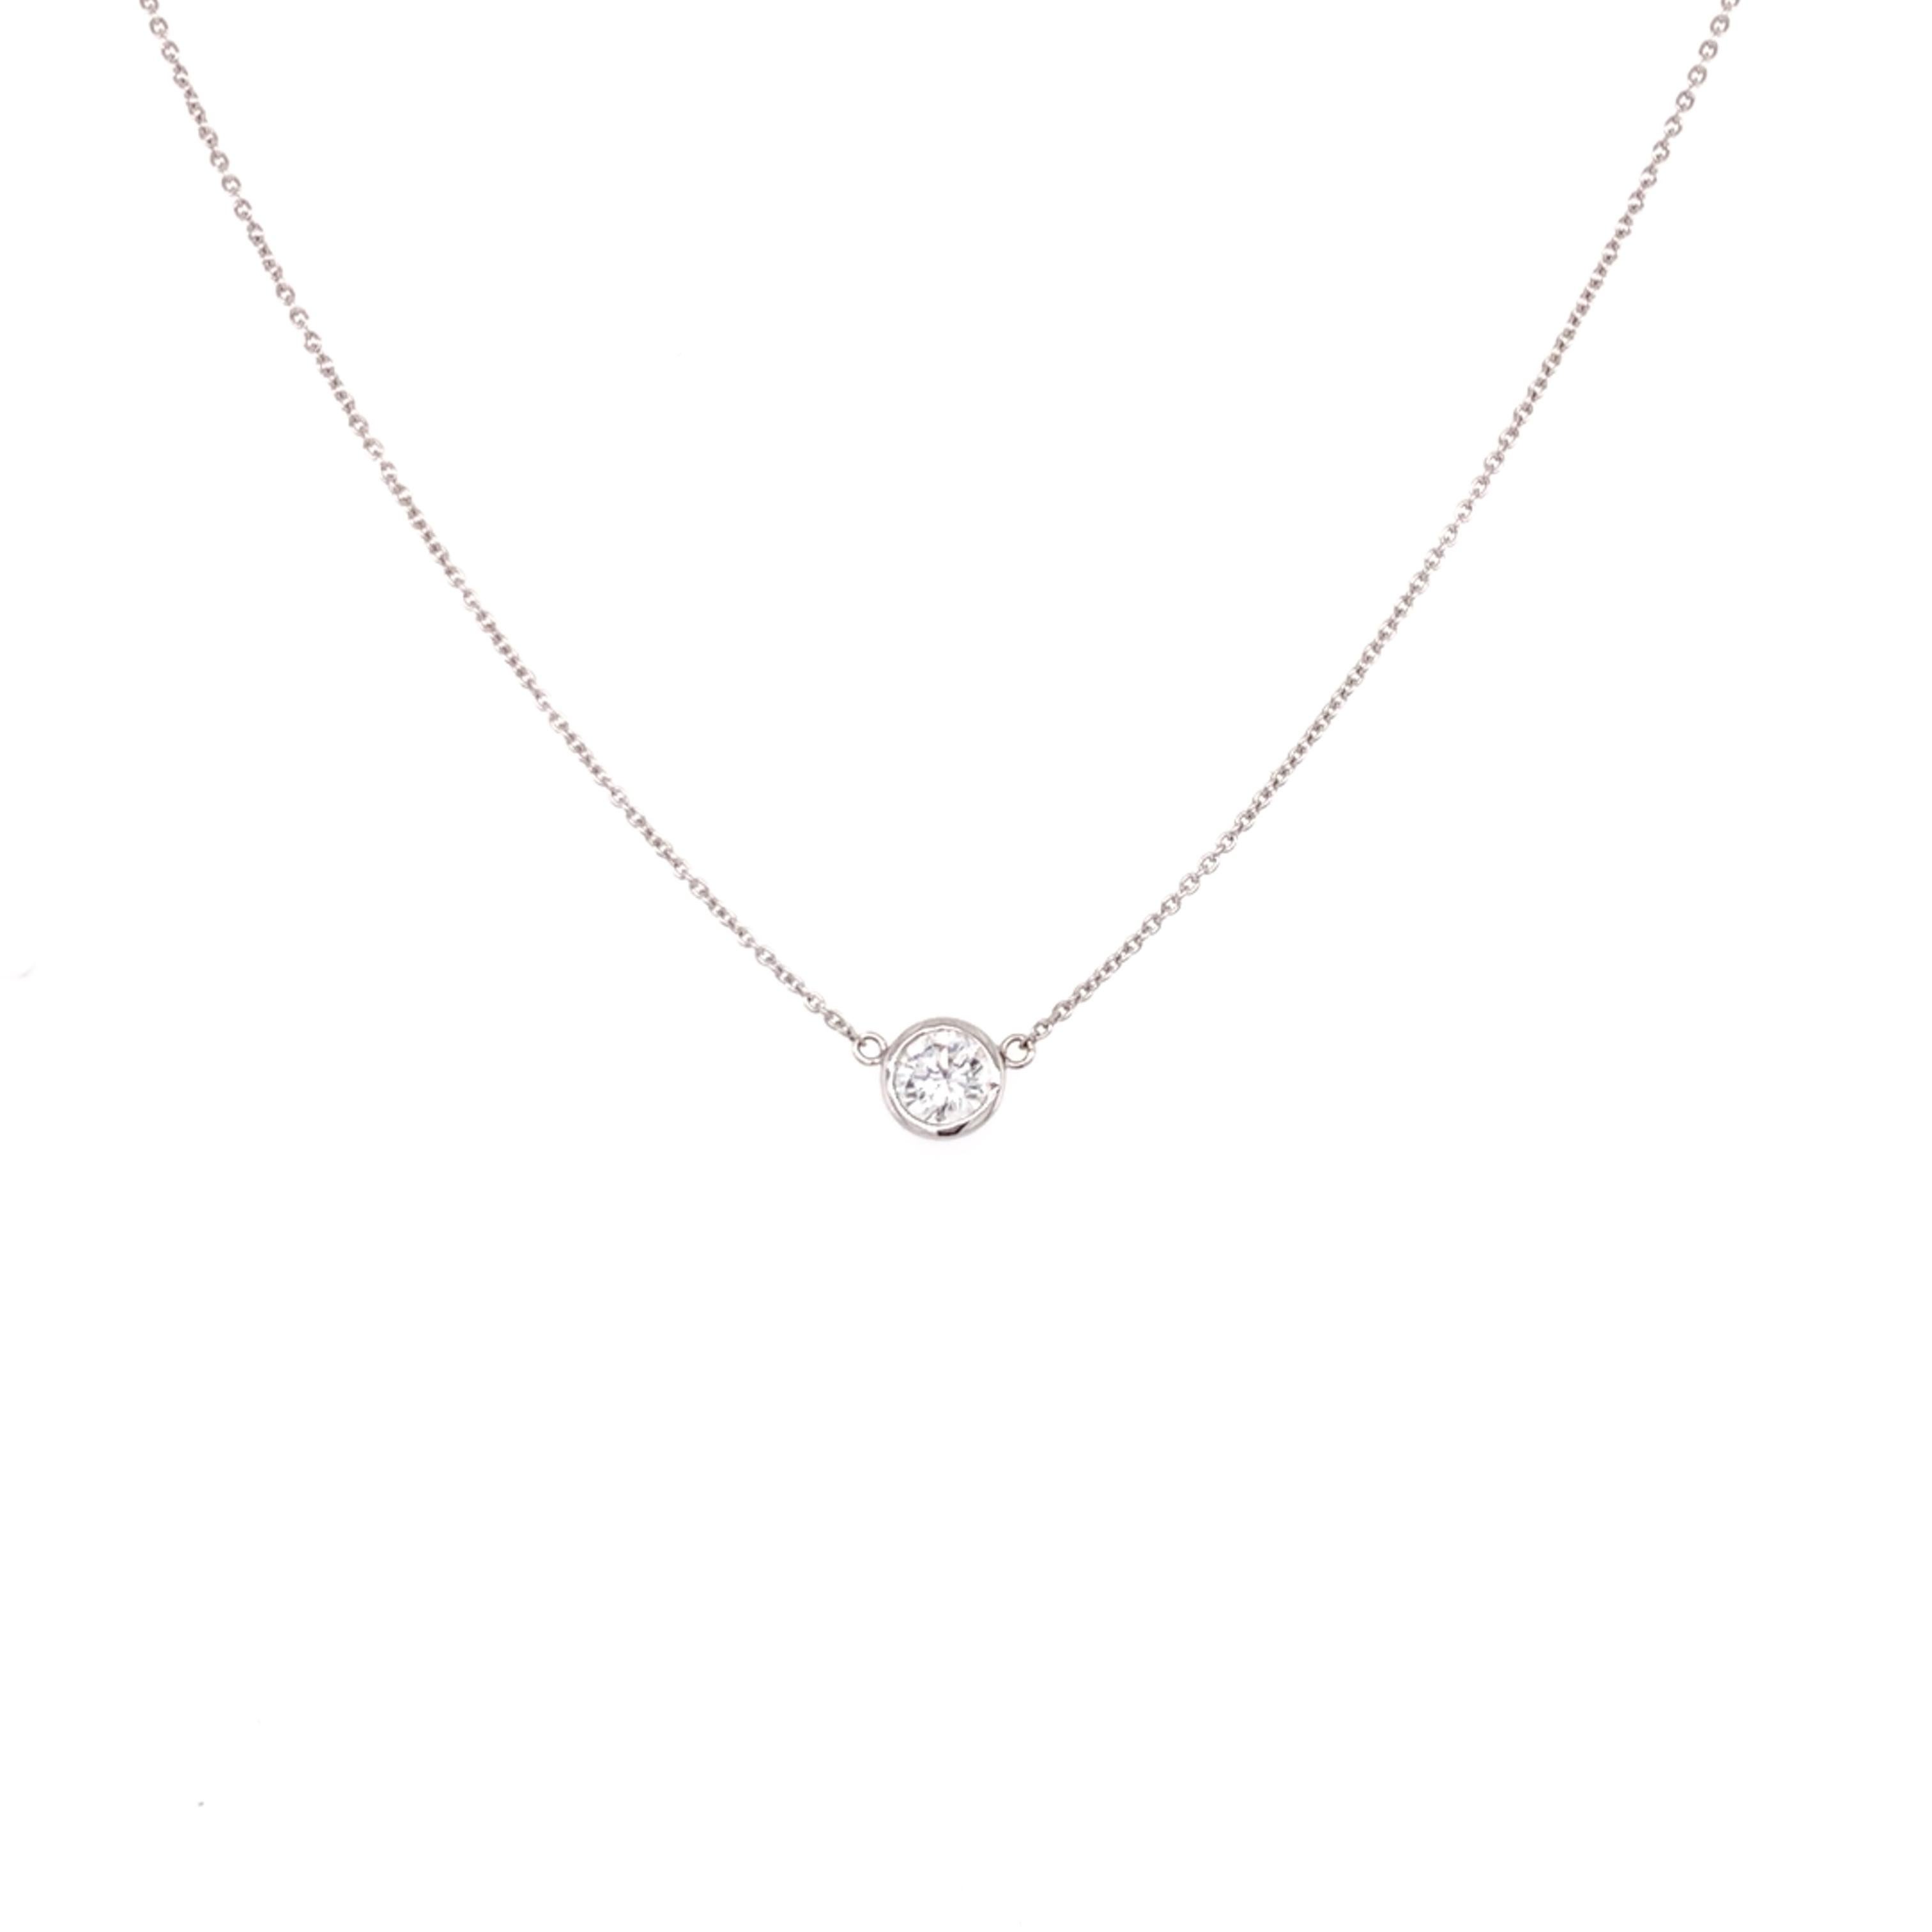 Bezzele/Solitaire Diamond Pendant Necklace made with real/natural brialliant cut diamonds. Total Diamond Weight: 0.38cts. Diamond Quantity: 1. Mounted on 18kt white gold, two setting adjustable chain.